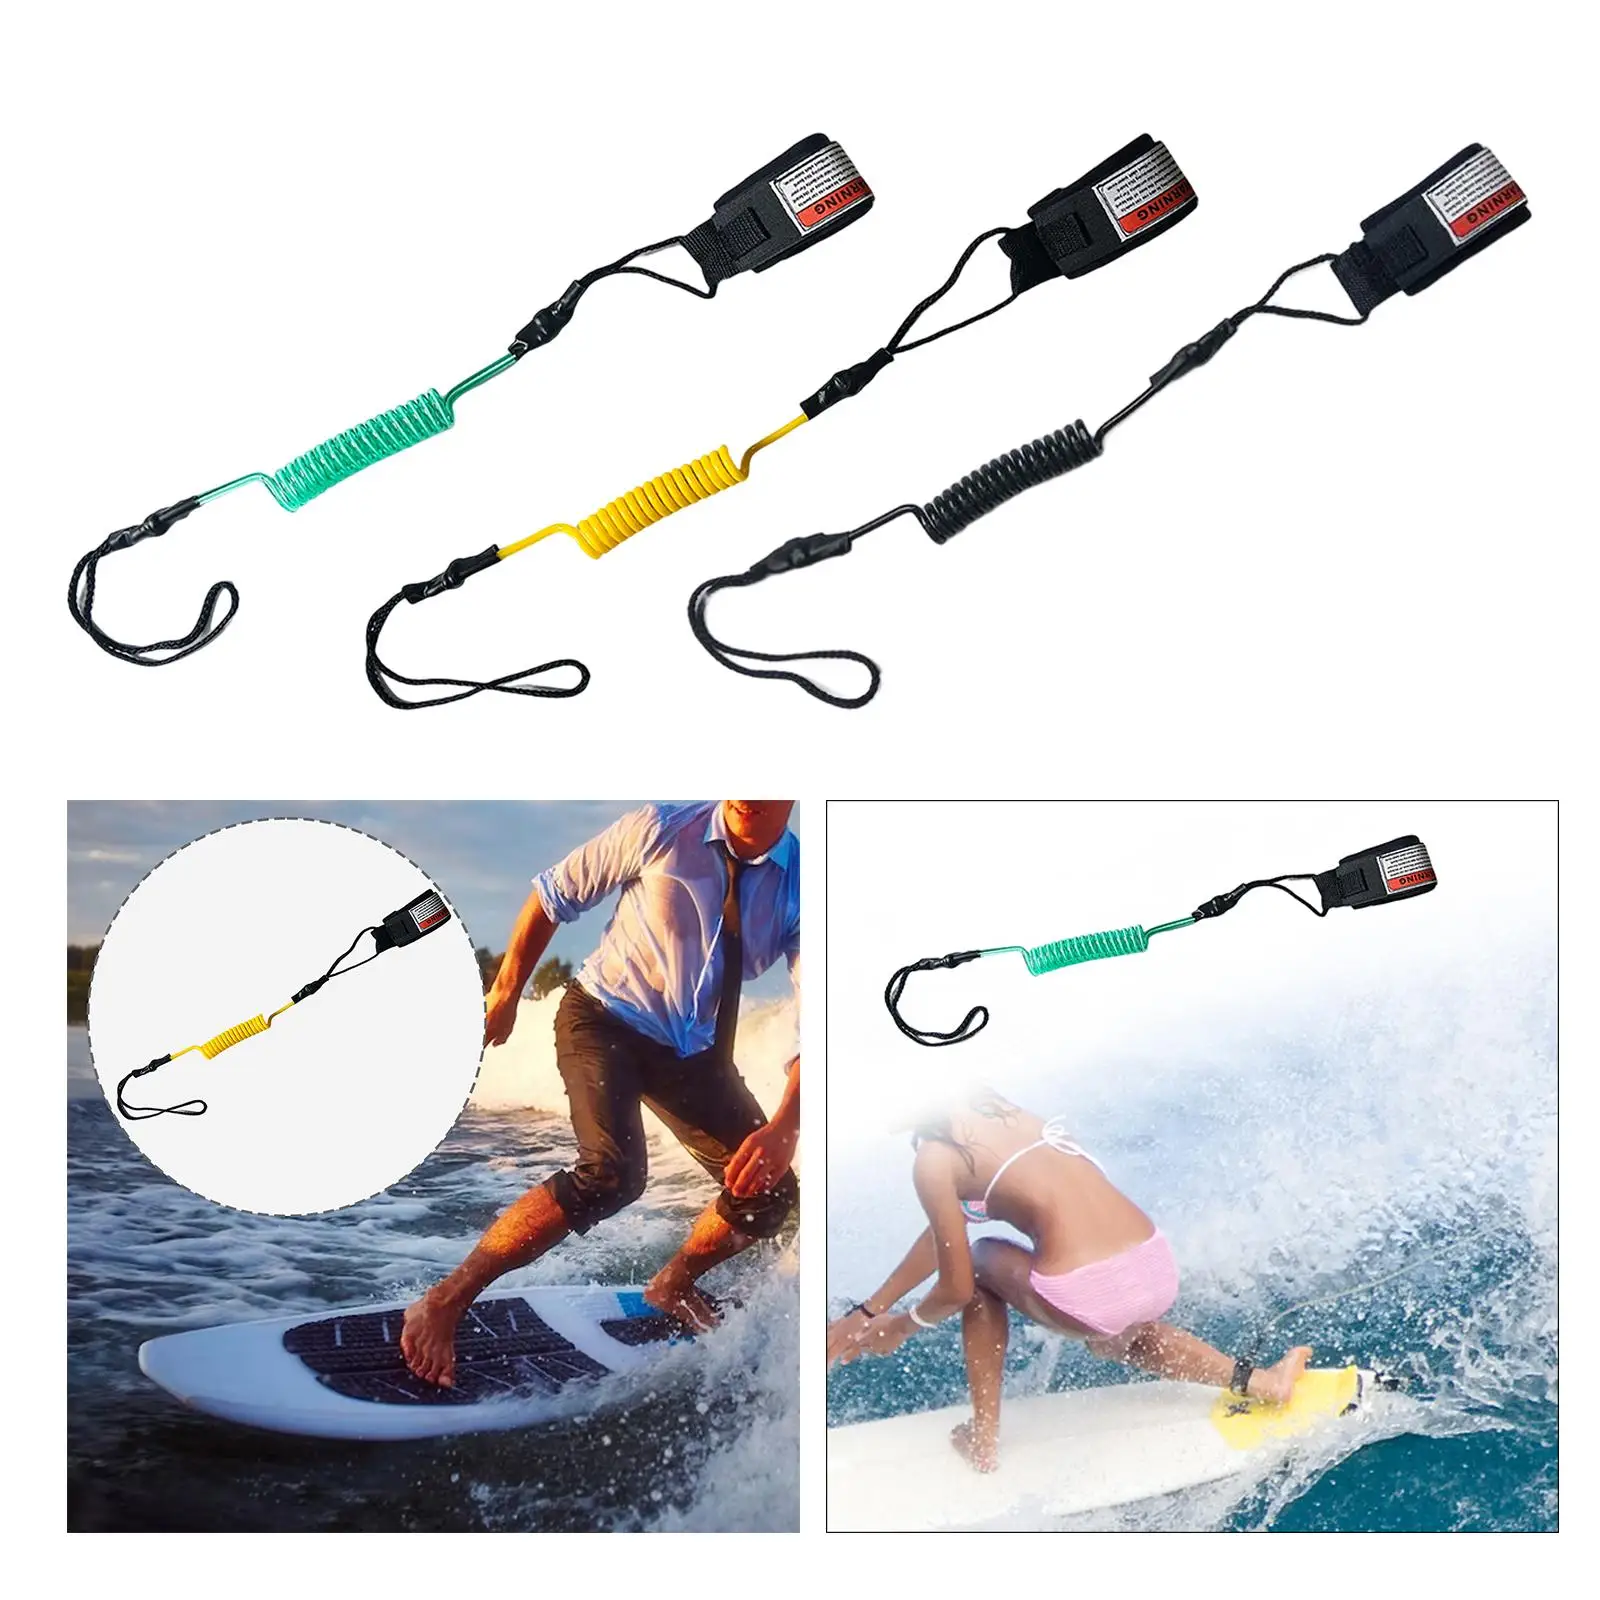 Surfboard Leash, Safety Leash Cord, surf Leash, Adjustable Coiled Paddle Board Rope for Surfing Water Sports Accessories